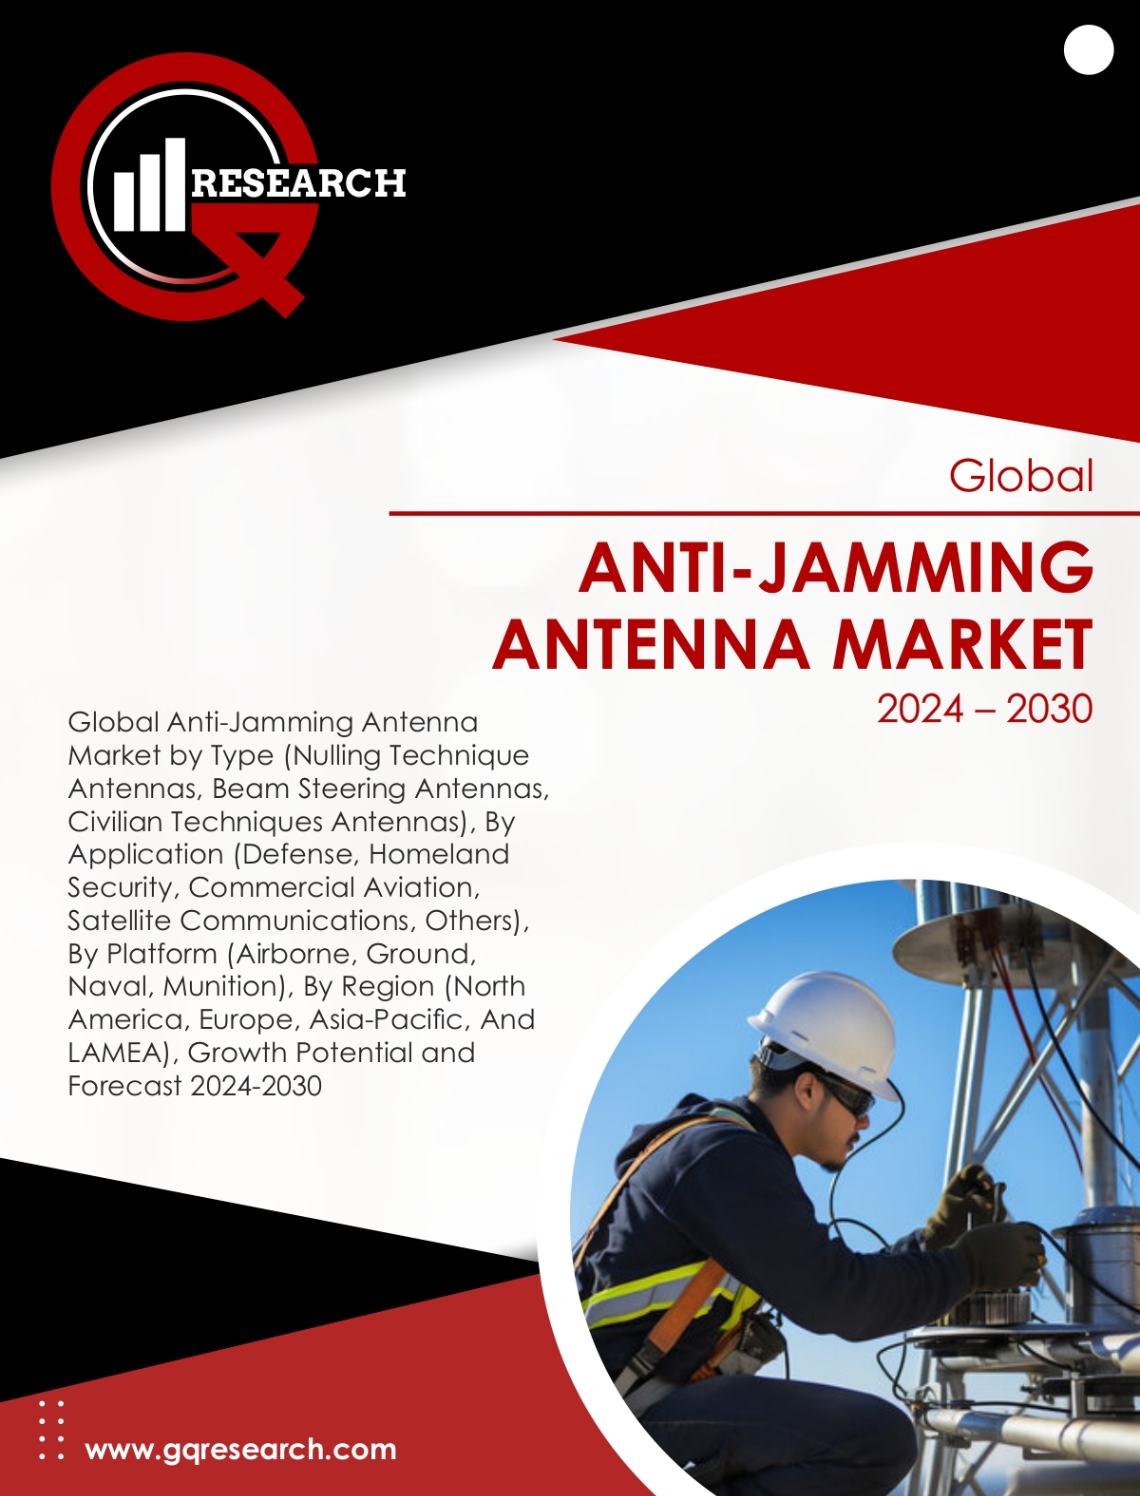 Anti-Jamming Antenna Market Share, Growth Analysis & Forecast to 2030 | GQ Research